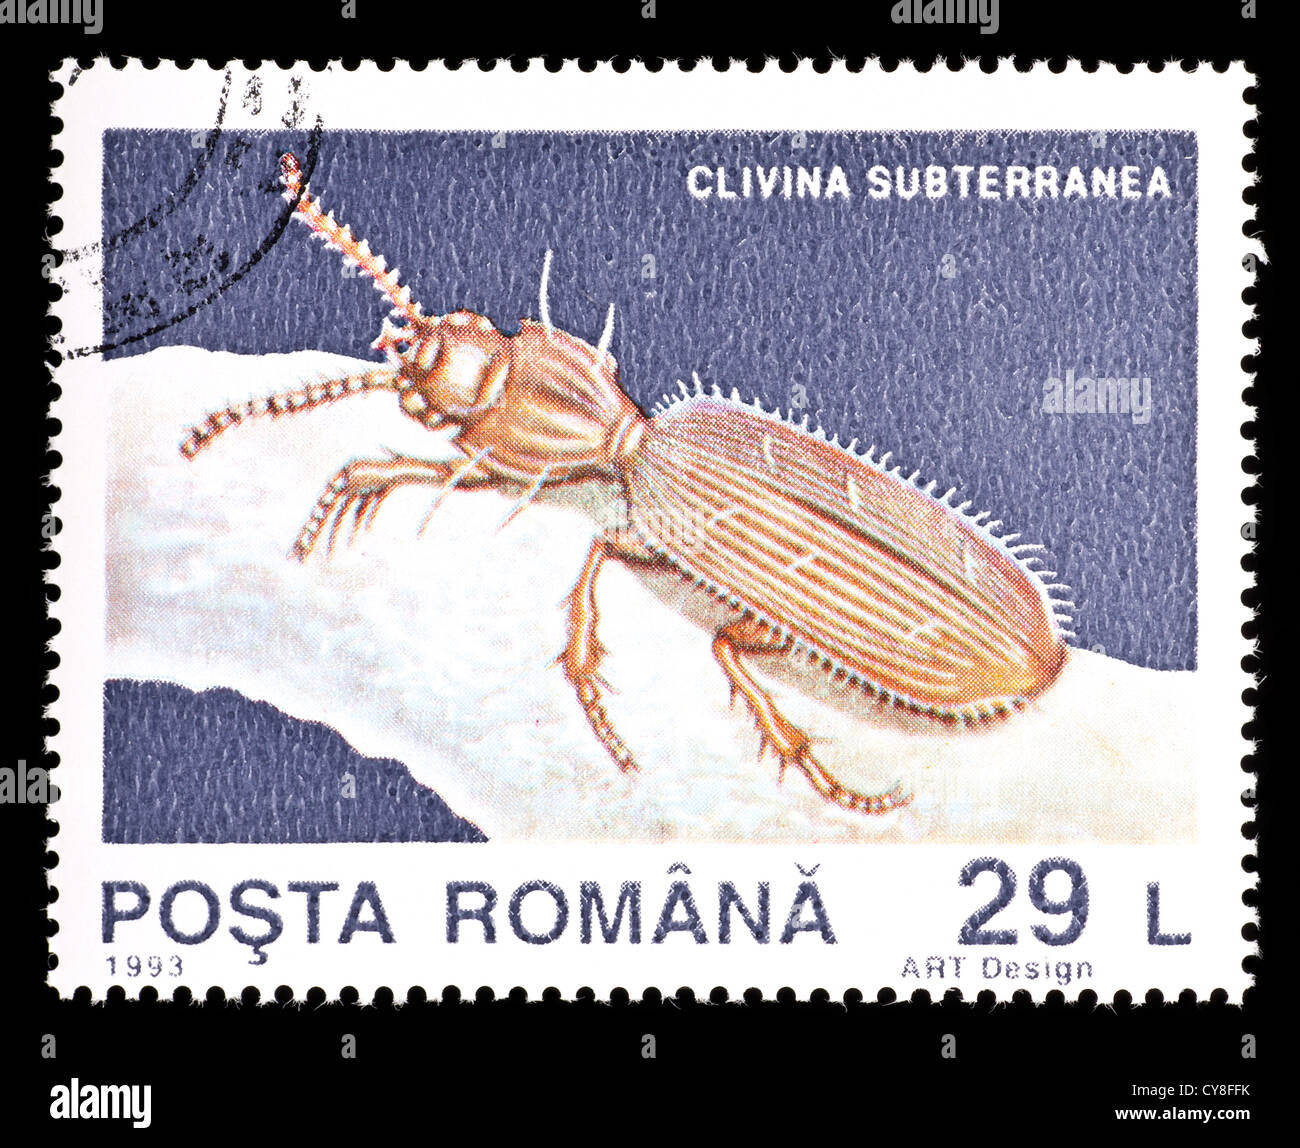 Postage stamp from Romania depicting a ground beetle (Clivina subterranea) Stock Photo